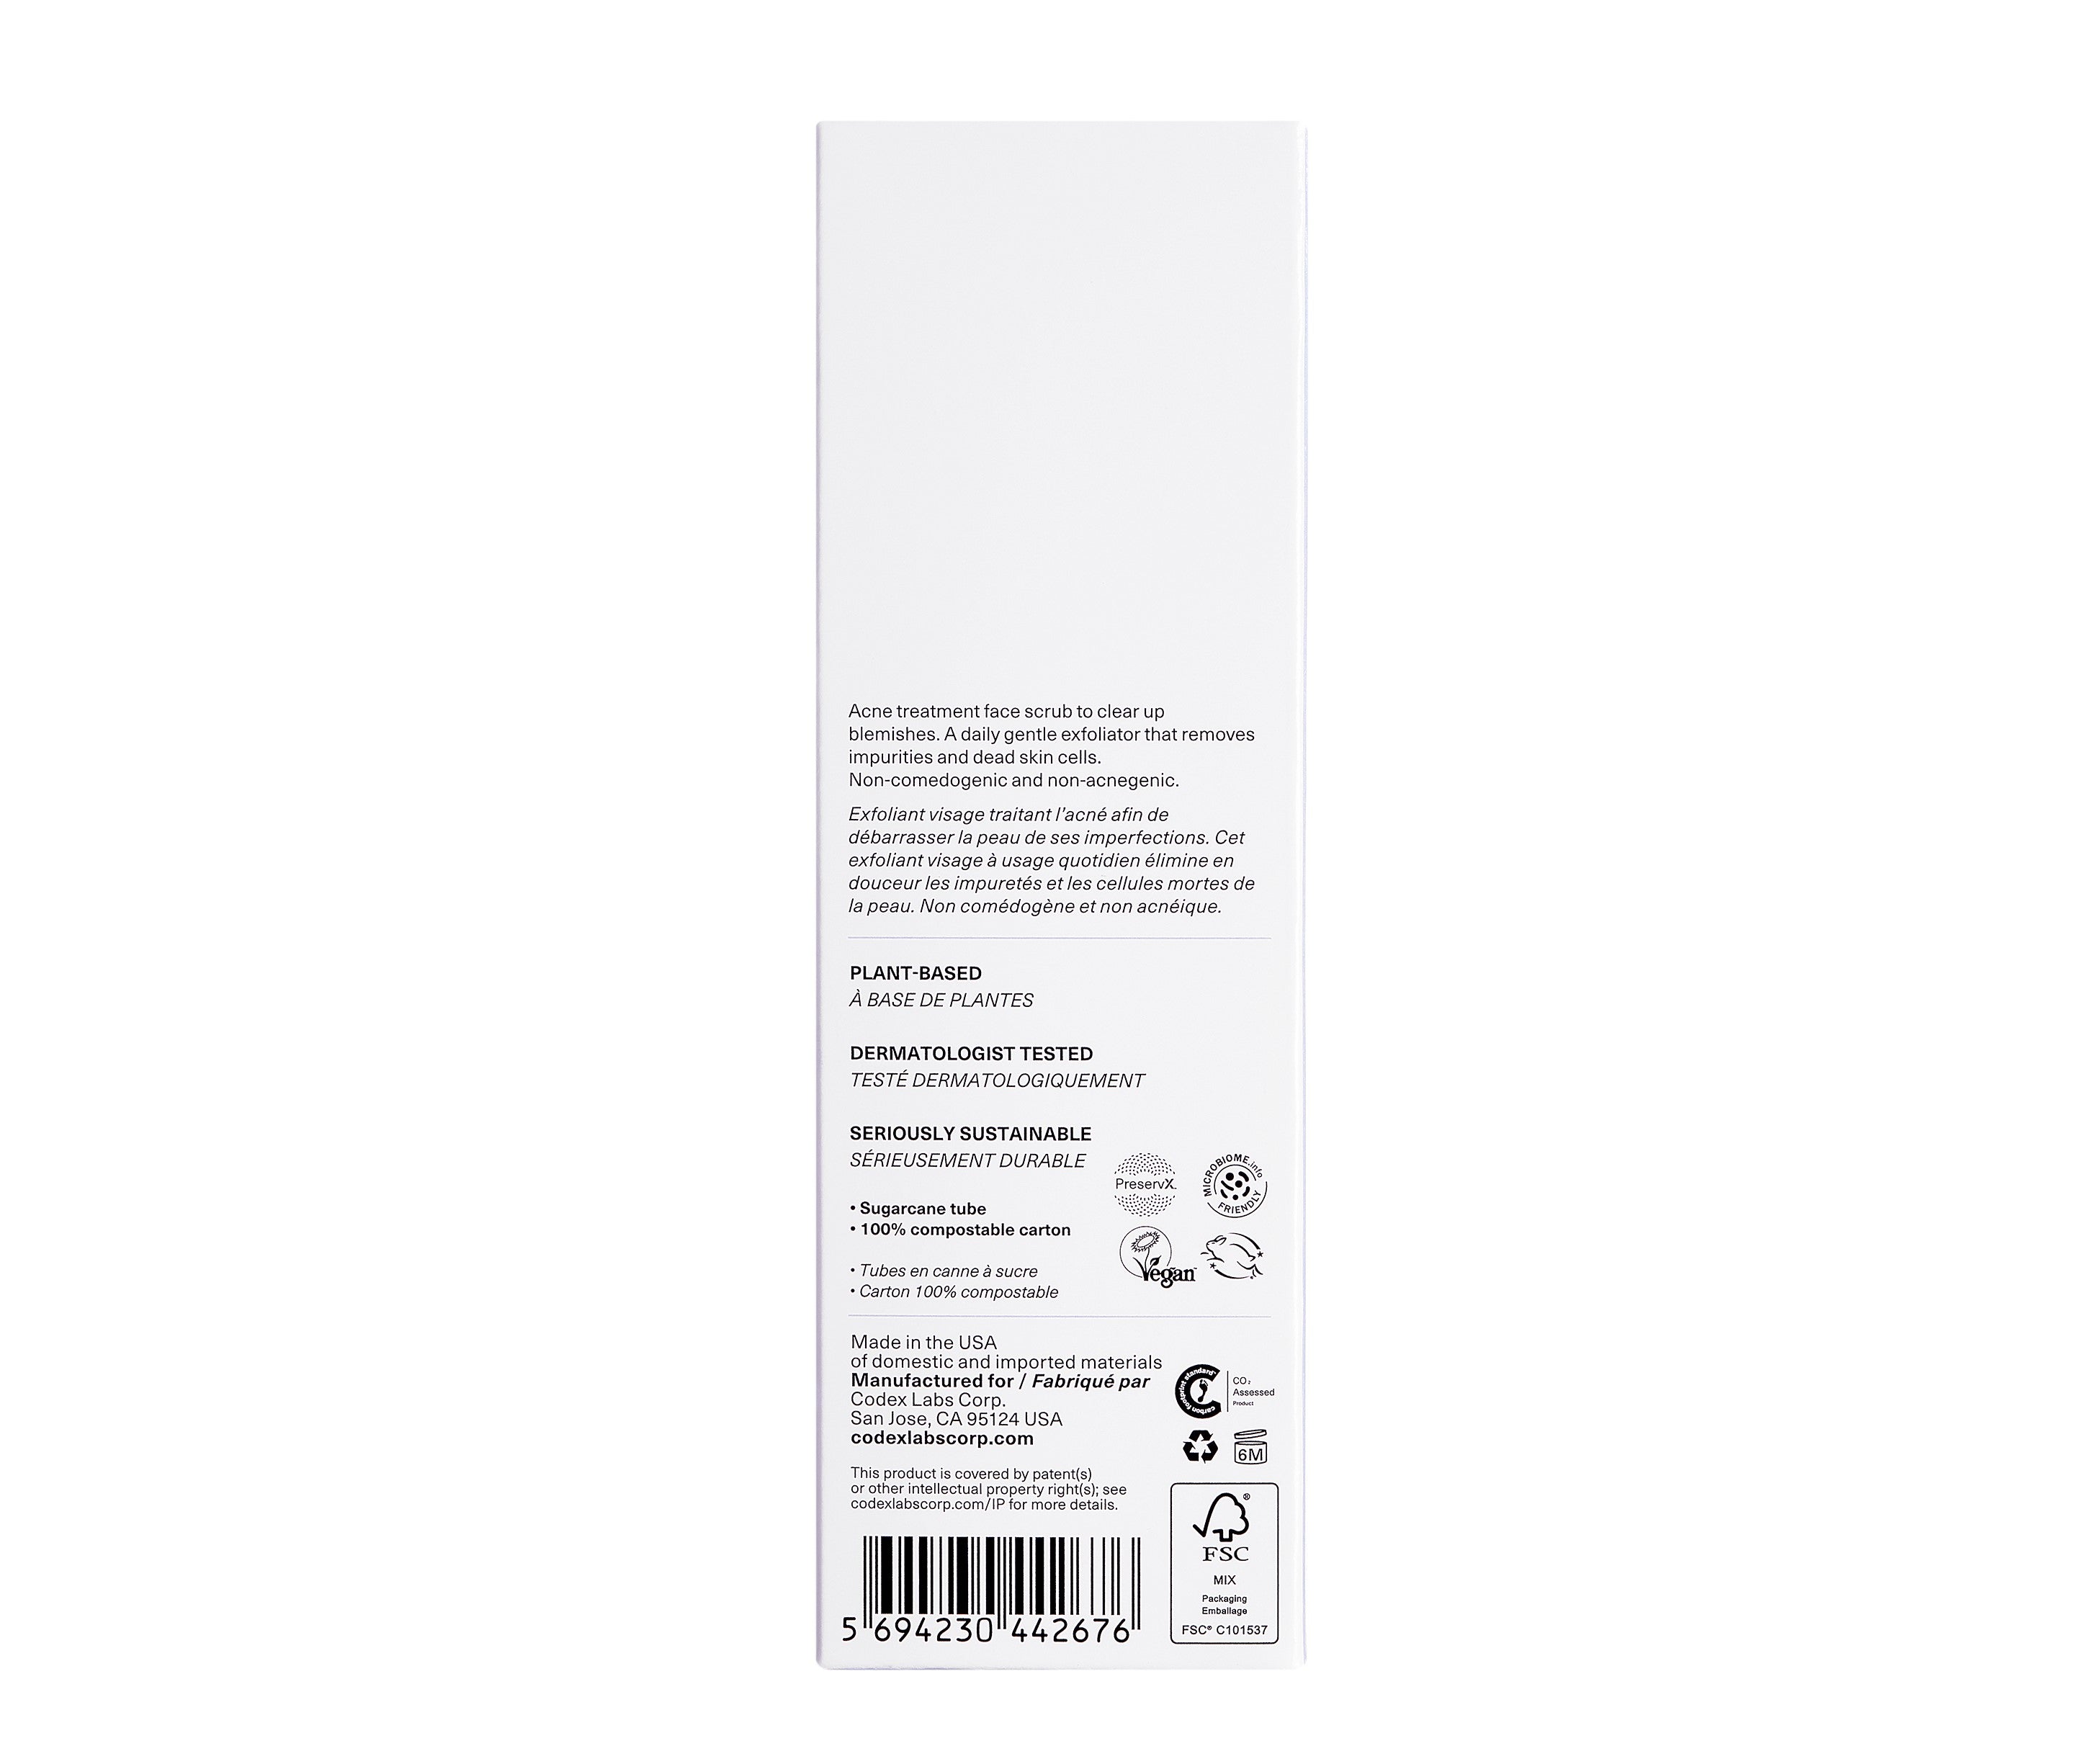 Shaant Pore Purifying Acne Face Scrub side of carton on white background.